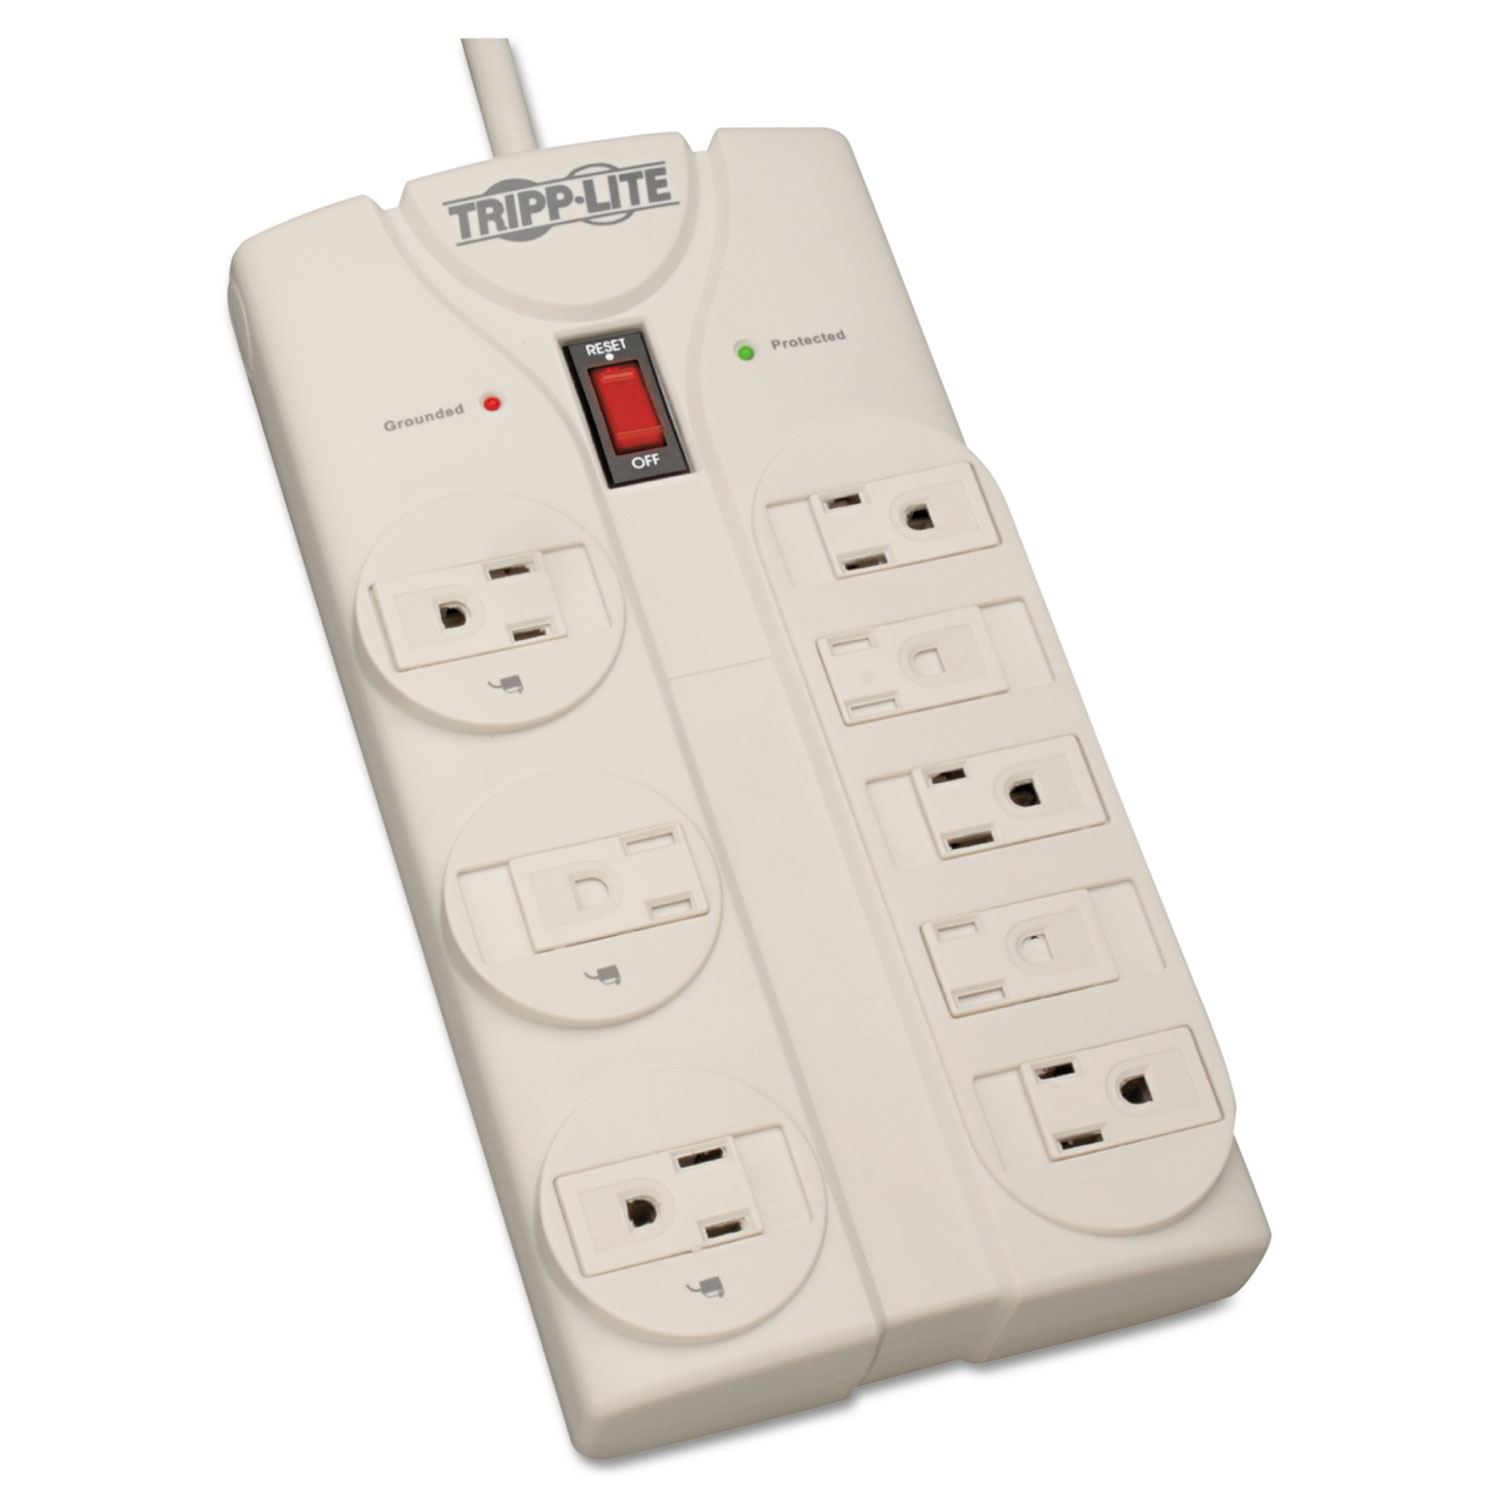  Tripp Lite TLP808 Protect It! Surge Protector, 8 Outlets, 8 ft. Cord, 1440 Joules, Light Gray (TRPTLP808) 